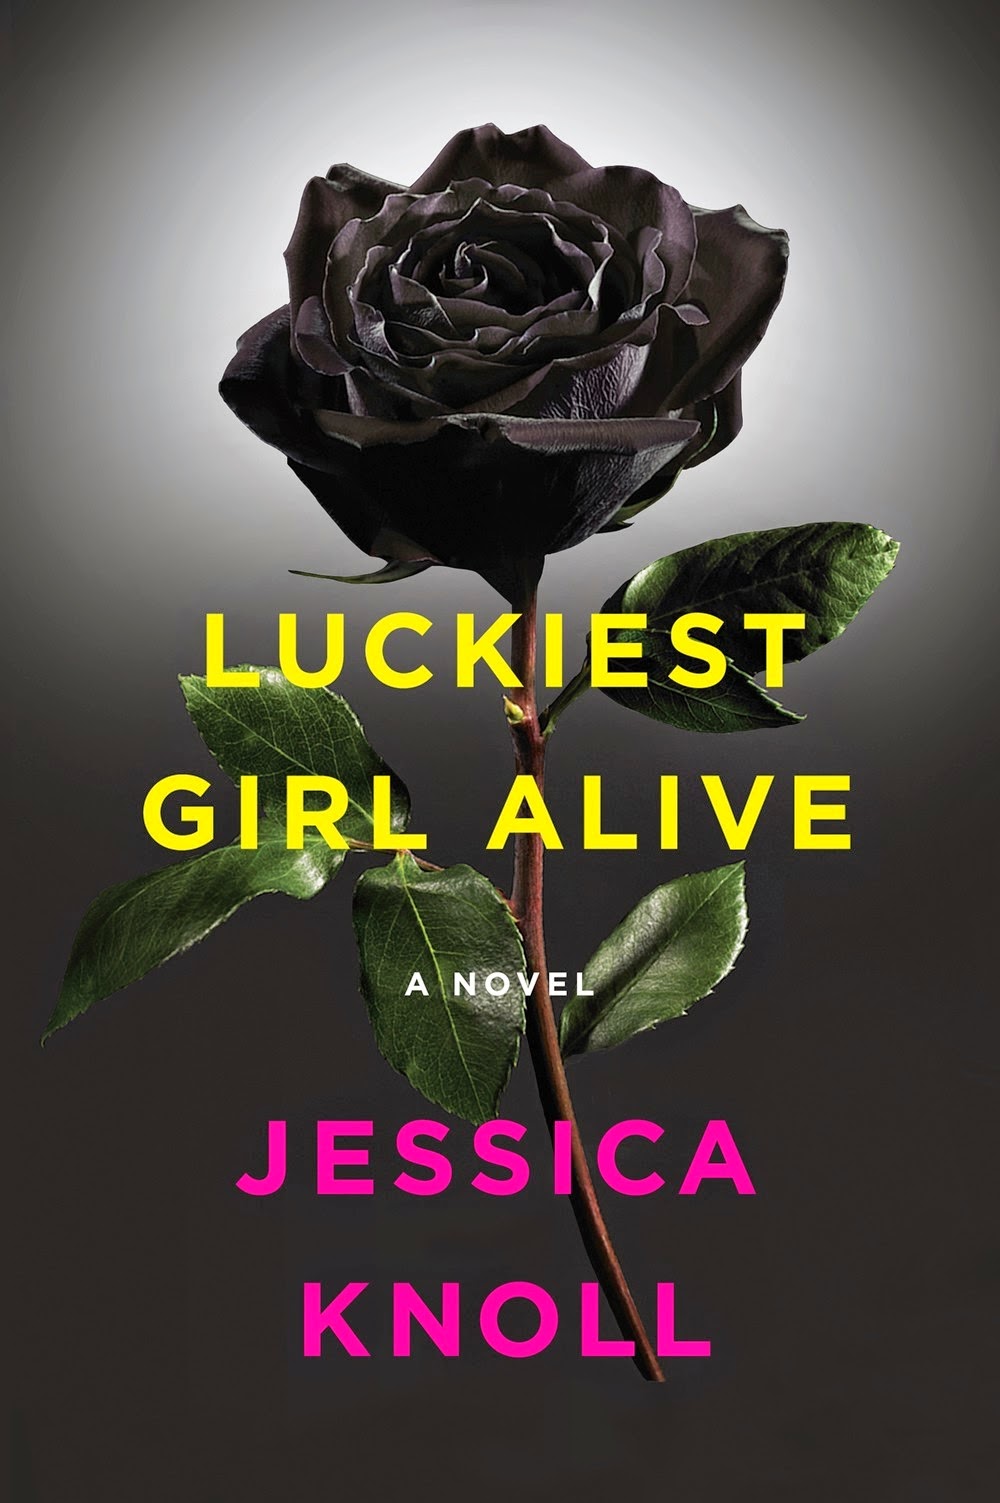 Vvb32 Reads Luckiest Girl Alive By Jessica Knoll